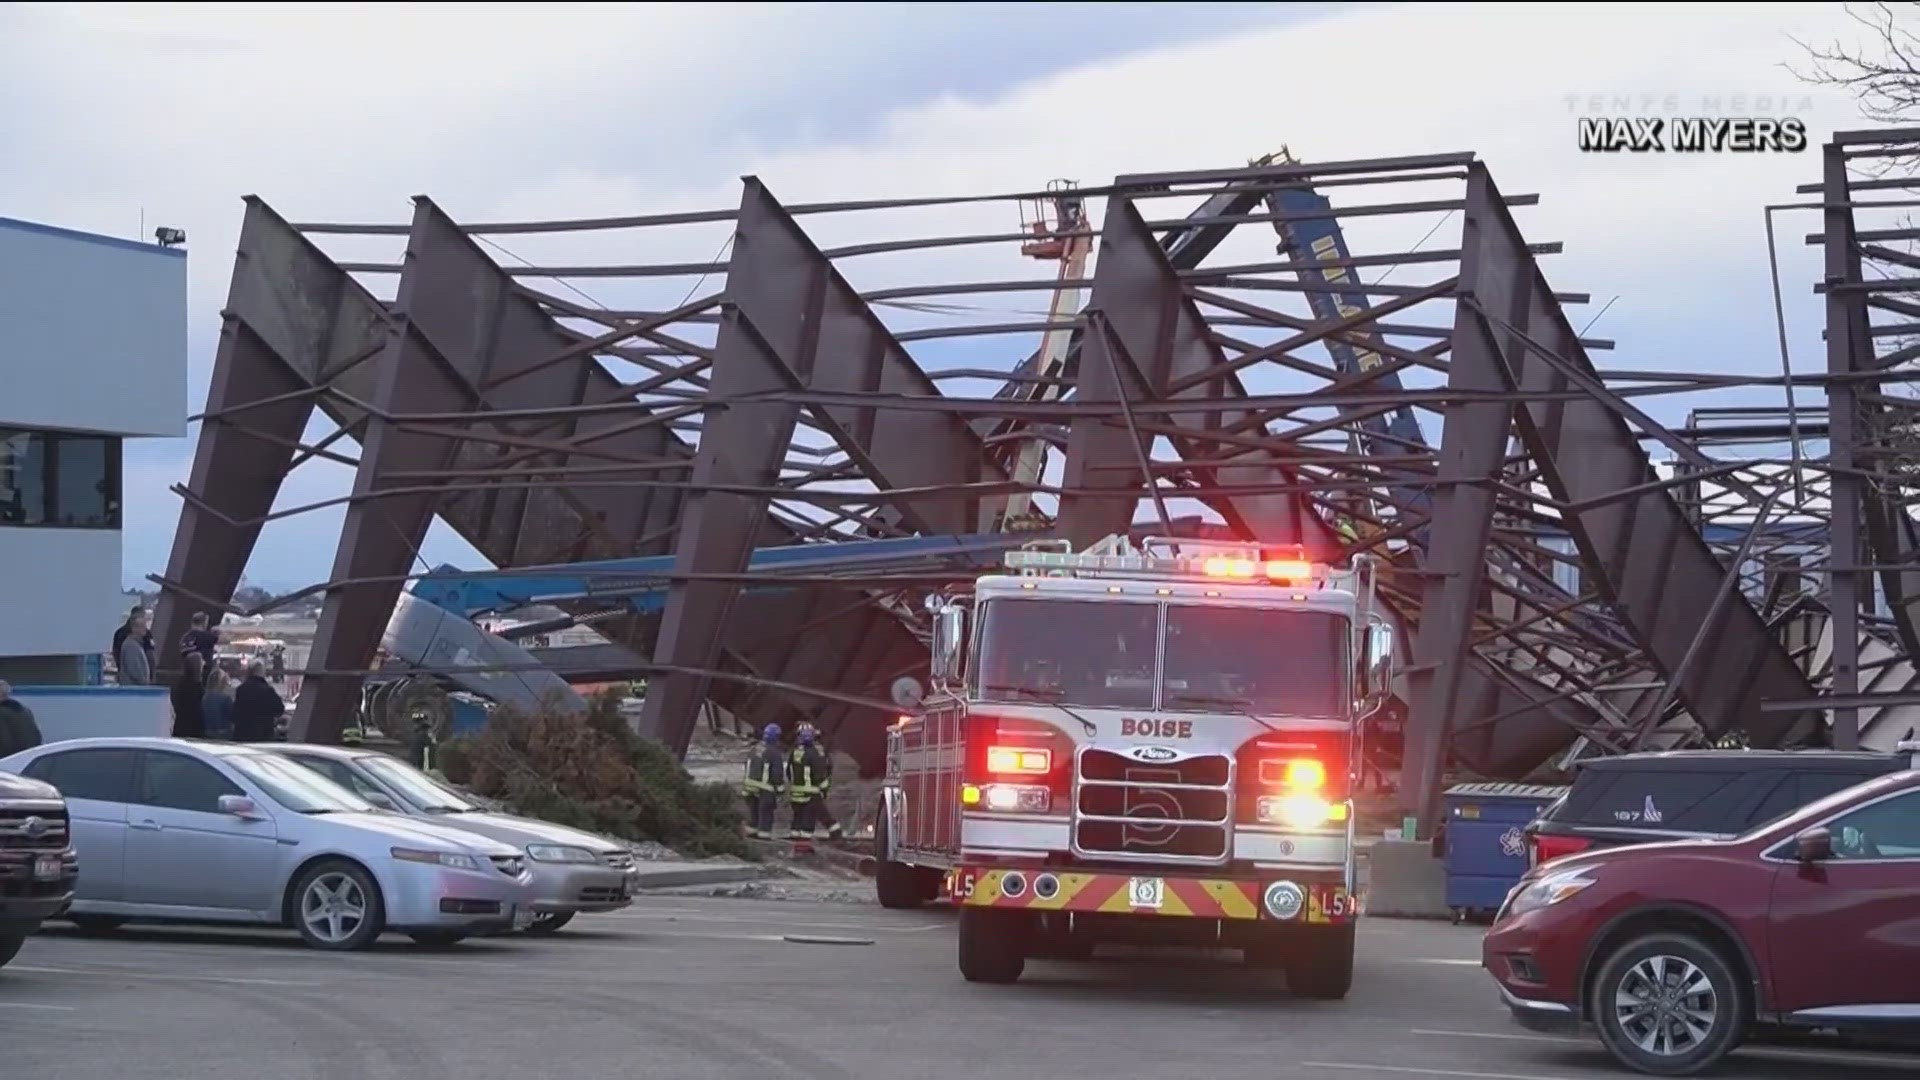 Three men died in the incident near the Boise airport. ​At the time of the incident, fire crews were already nearby the collapse zone conducting training exercises.